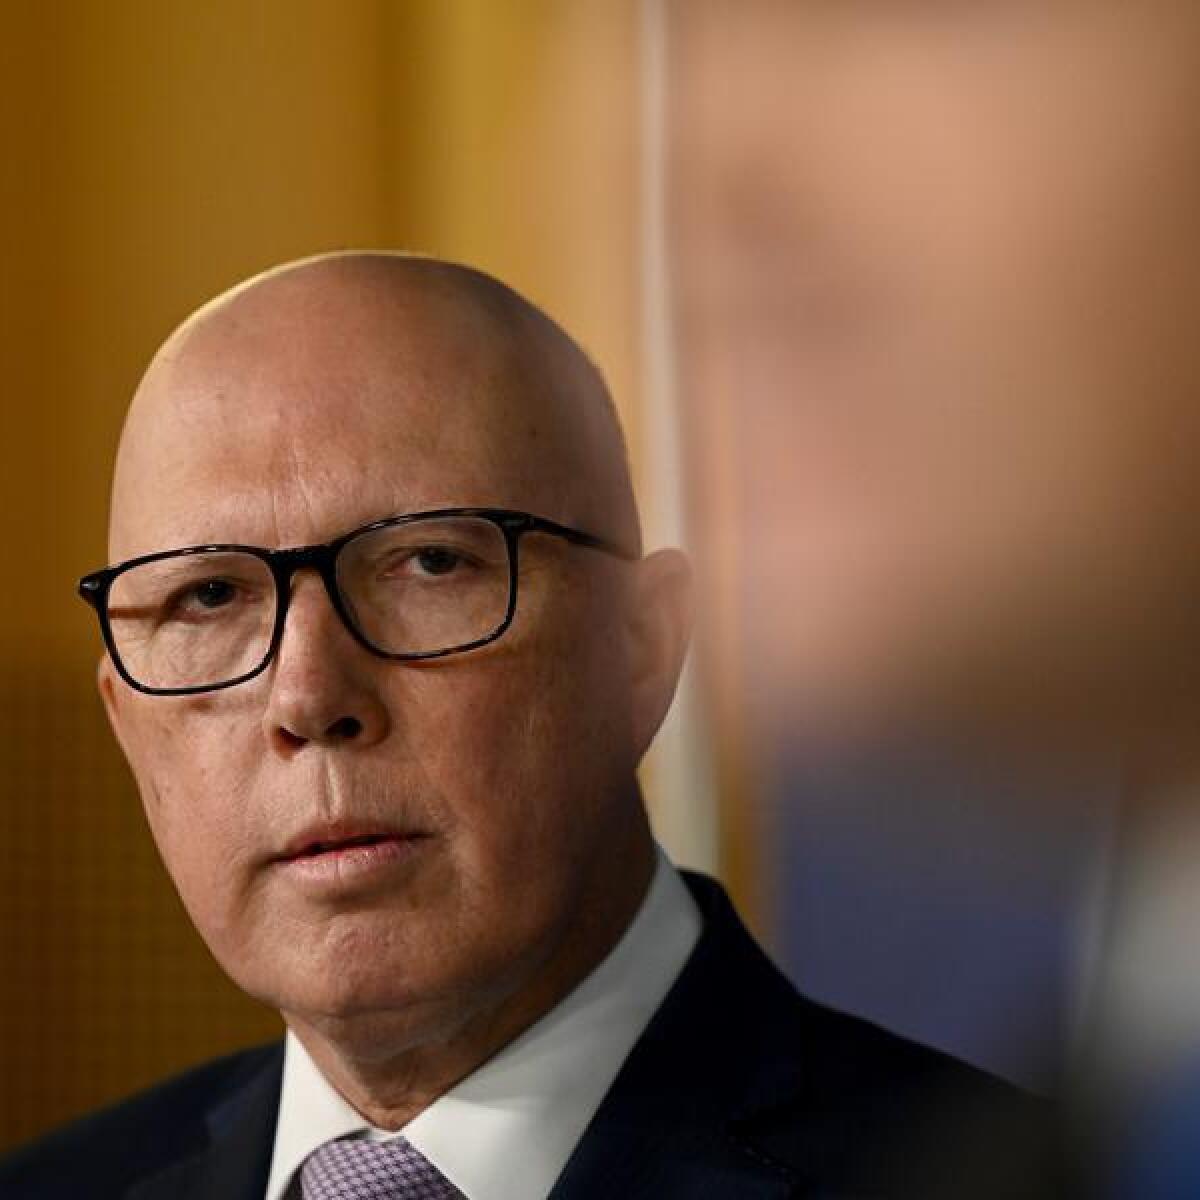 Opposition Leader Peter Dutton at a press conference.